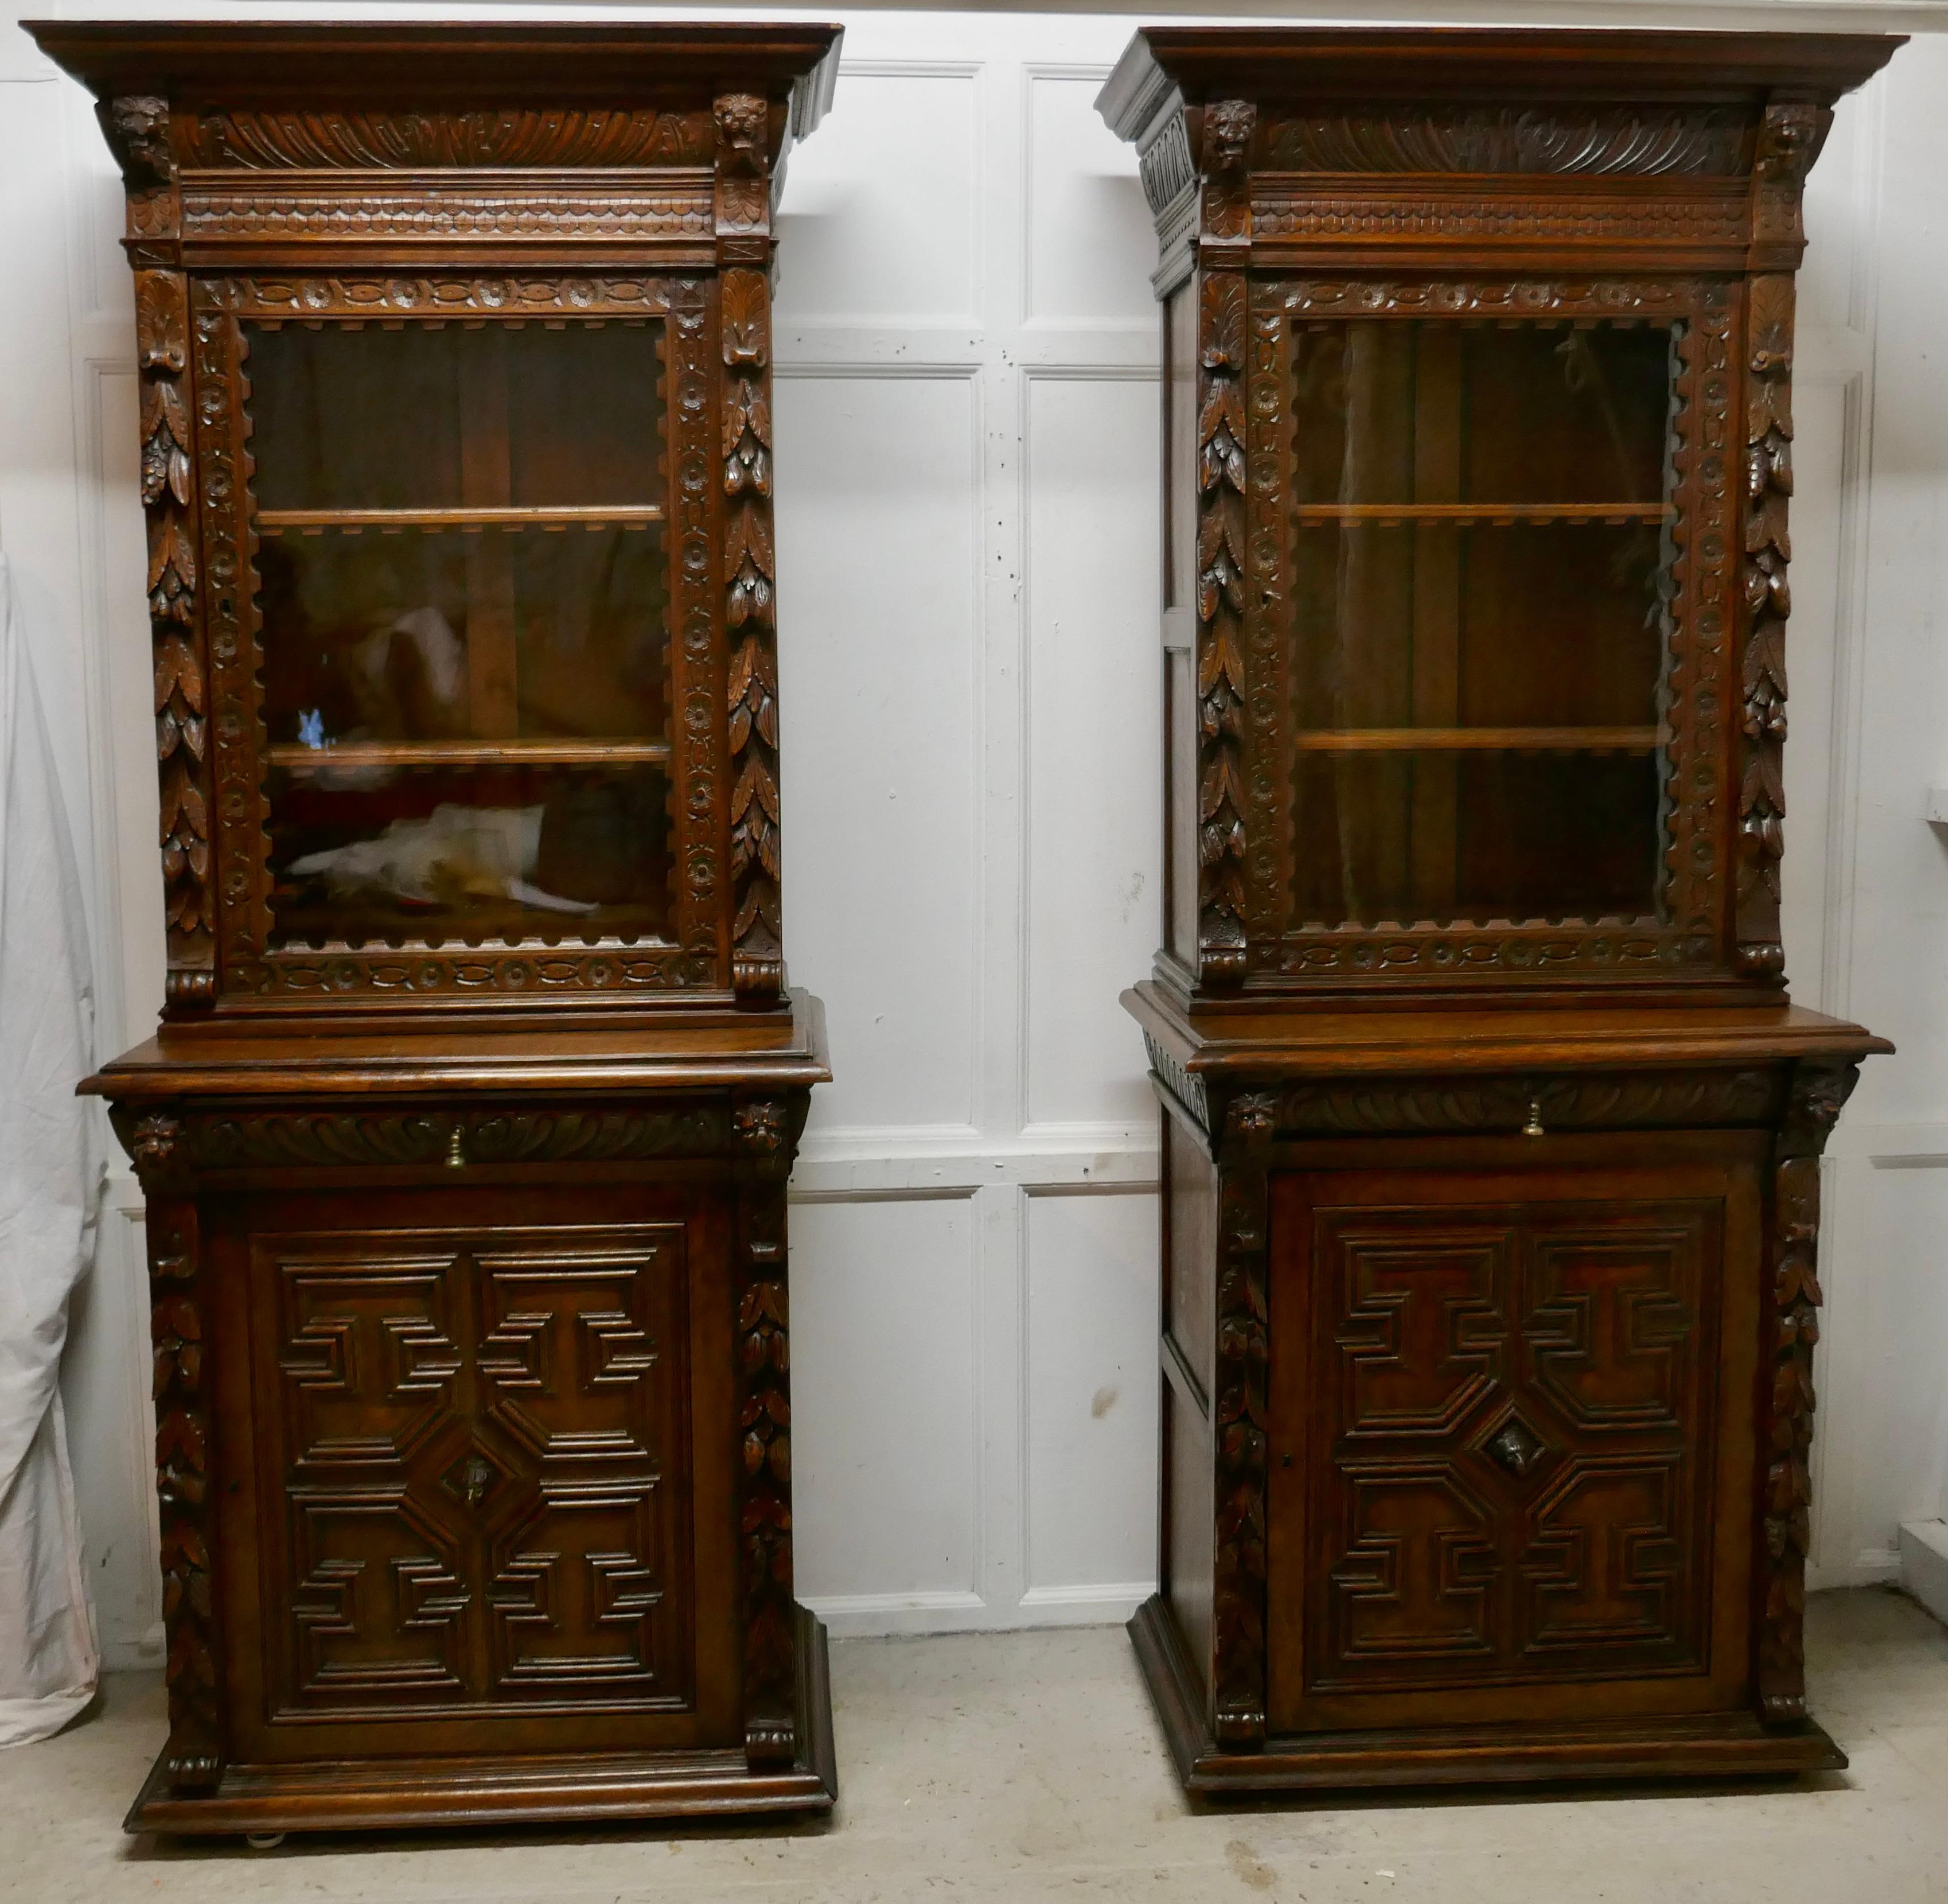 A Pair of French Carved Gothic Oak Bookcases

The upper section of the Bookcases have a glazed door enclosing 2 adjustable book shelves, these have an attractive carved front edge. 
The Tops have a large carved cornice and there is carving on the